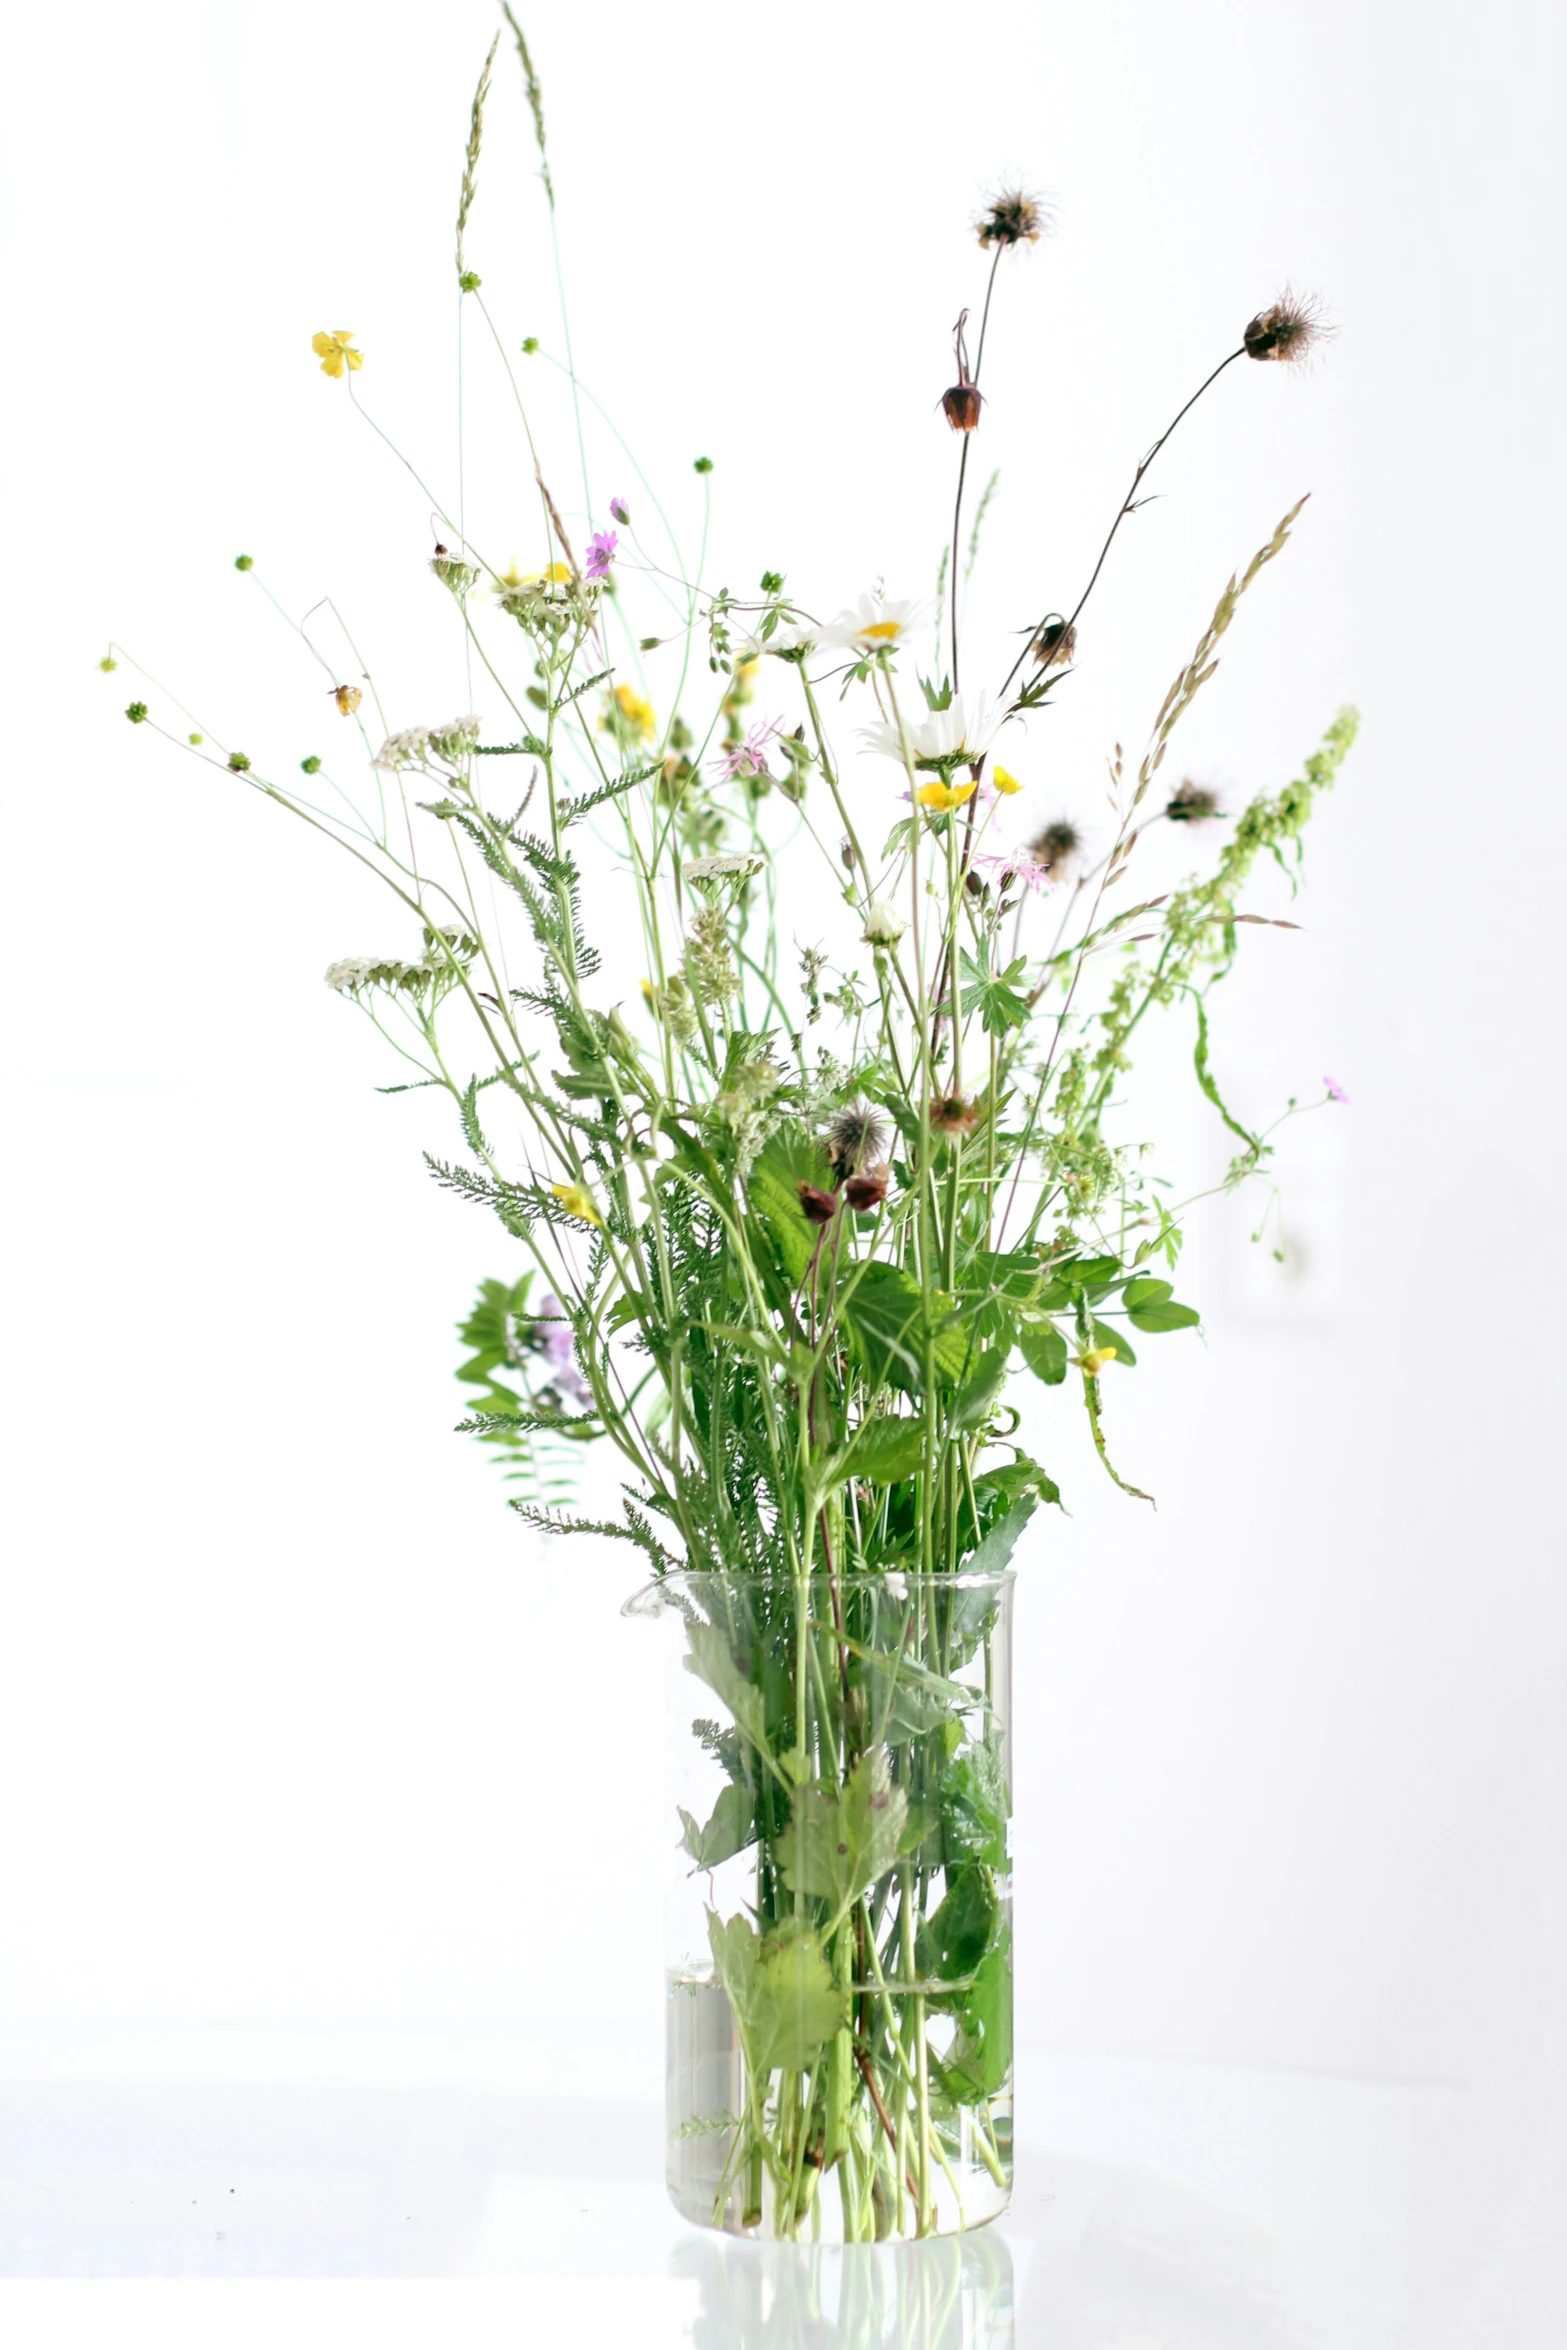 a glass vase with water, grass and flowers in it